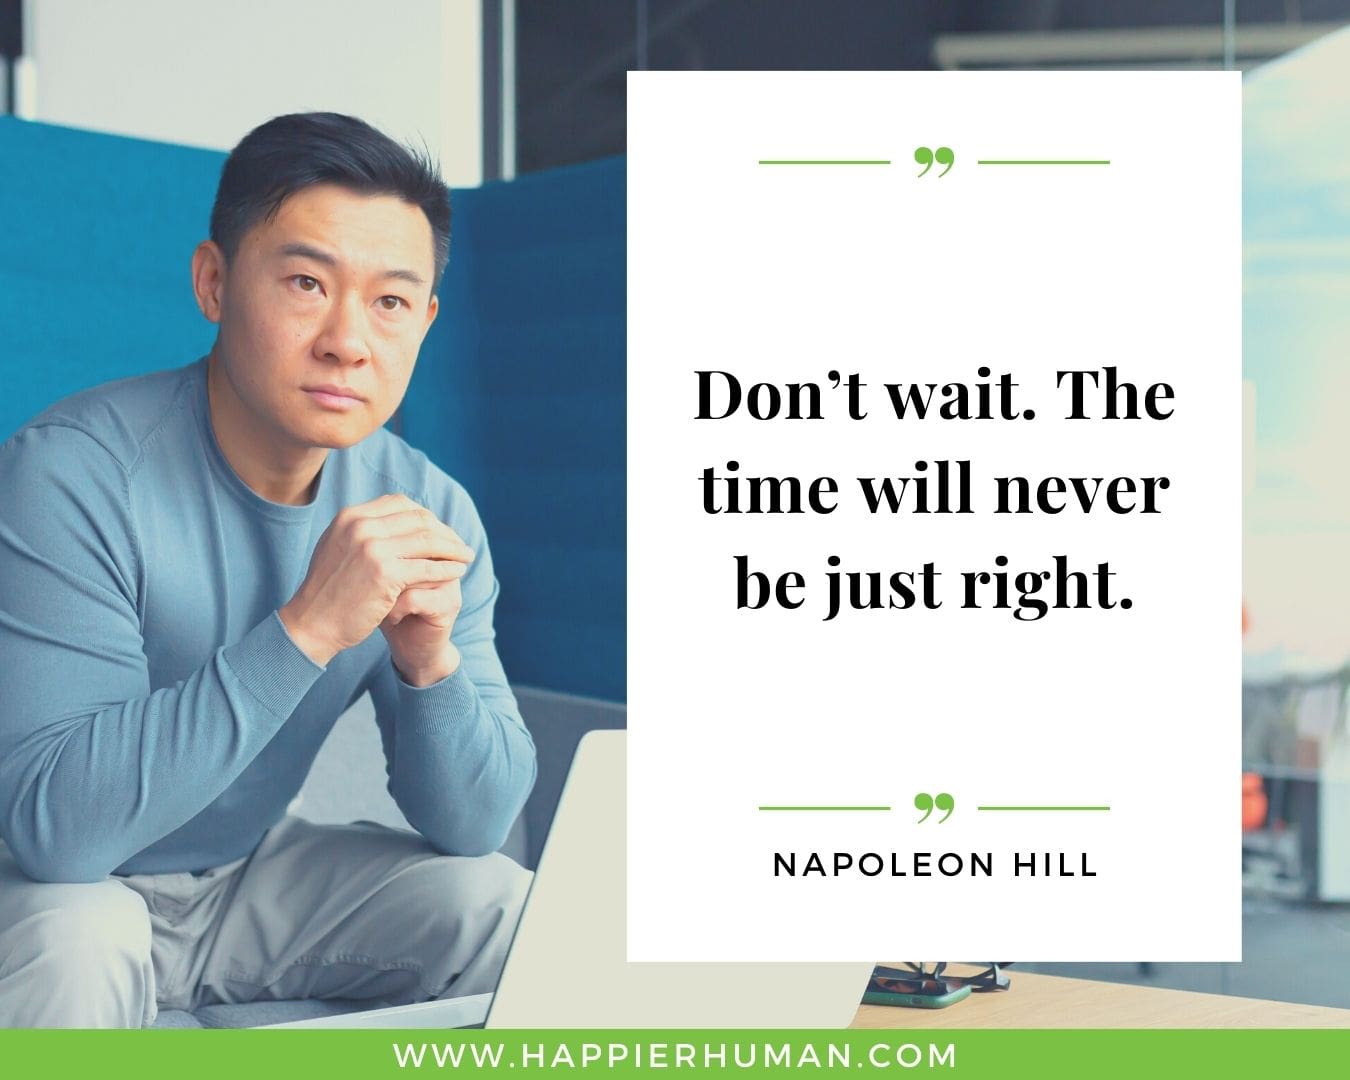 Overthinking Quotes - “Don’t wait. The time will never be just right.” – Napoleon Hill